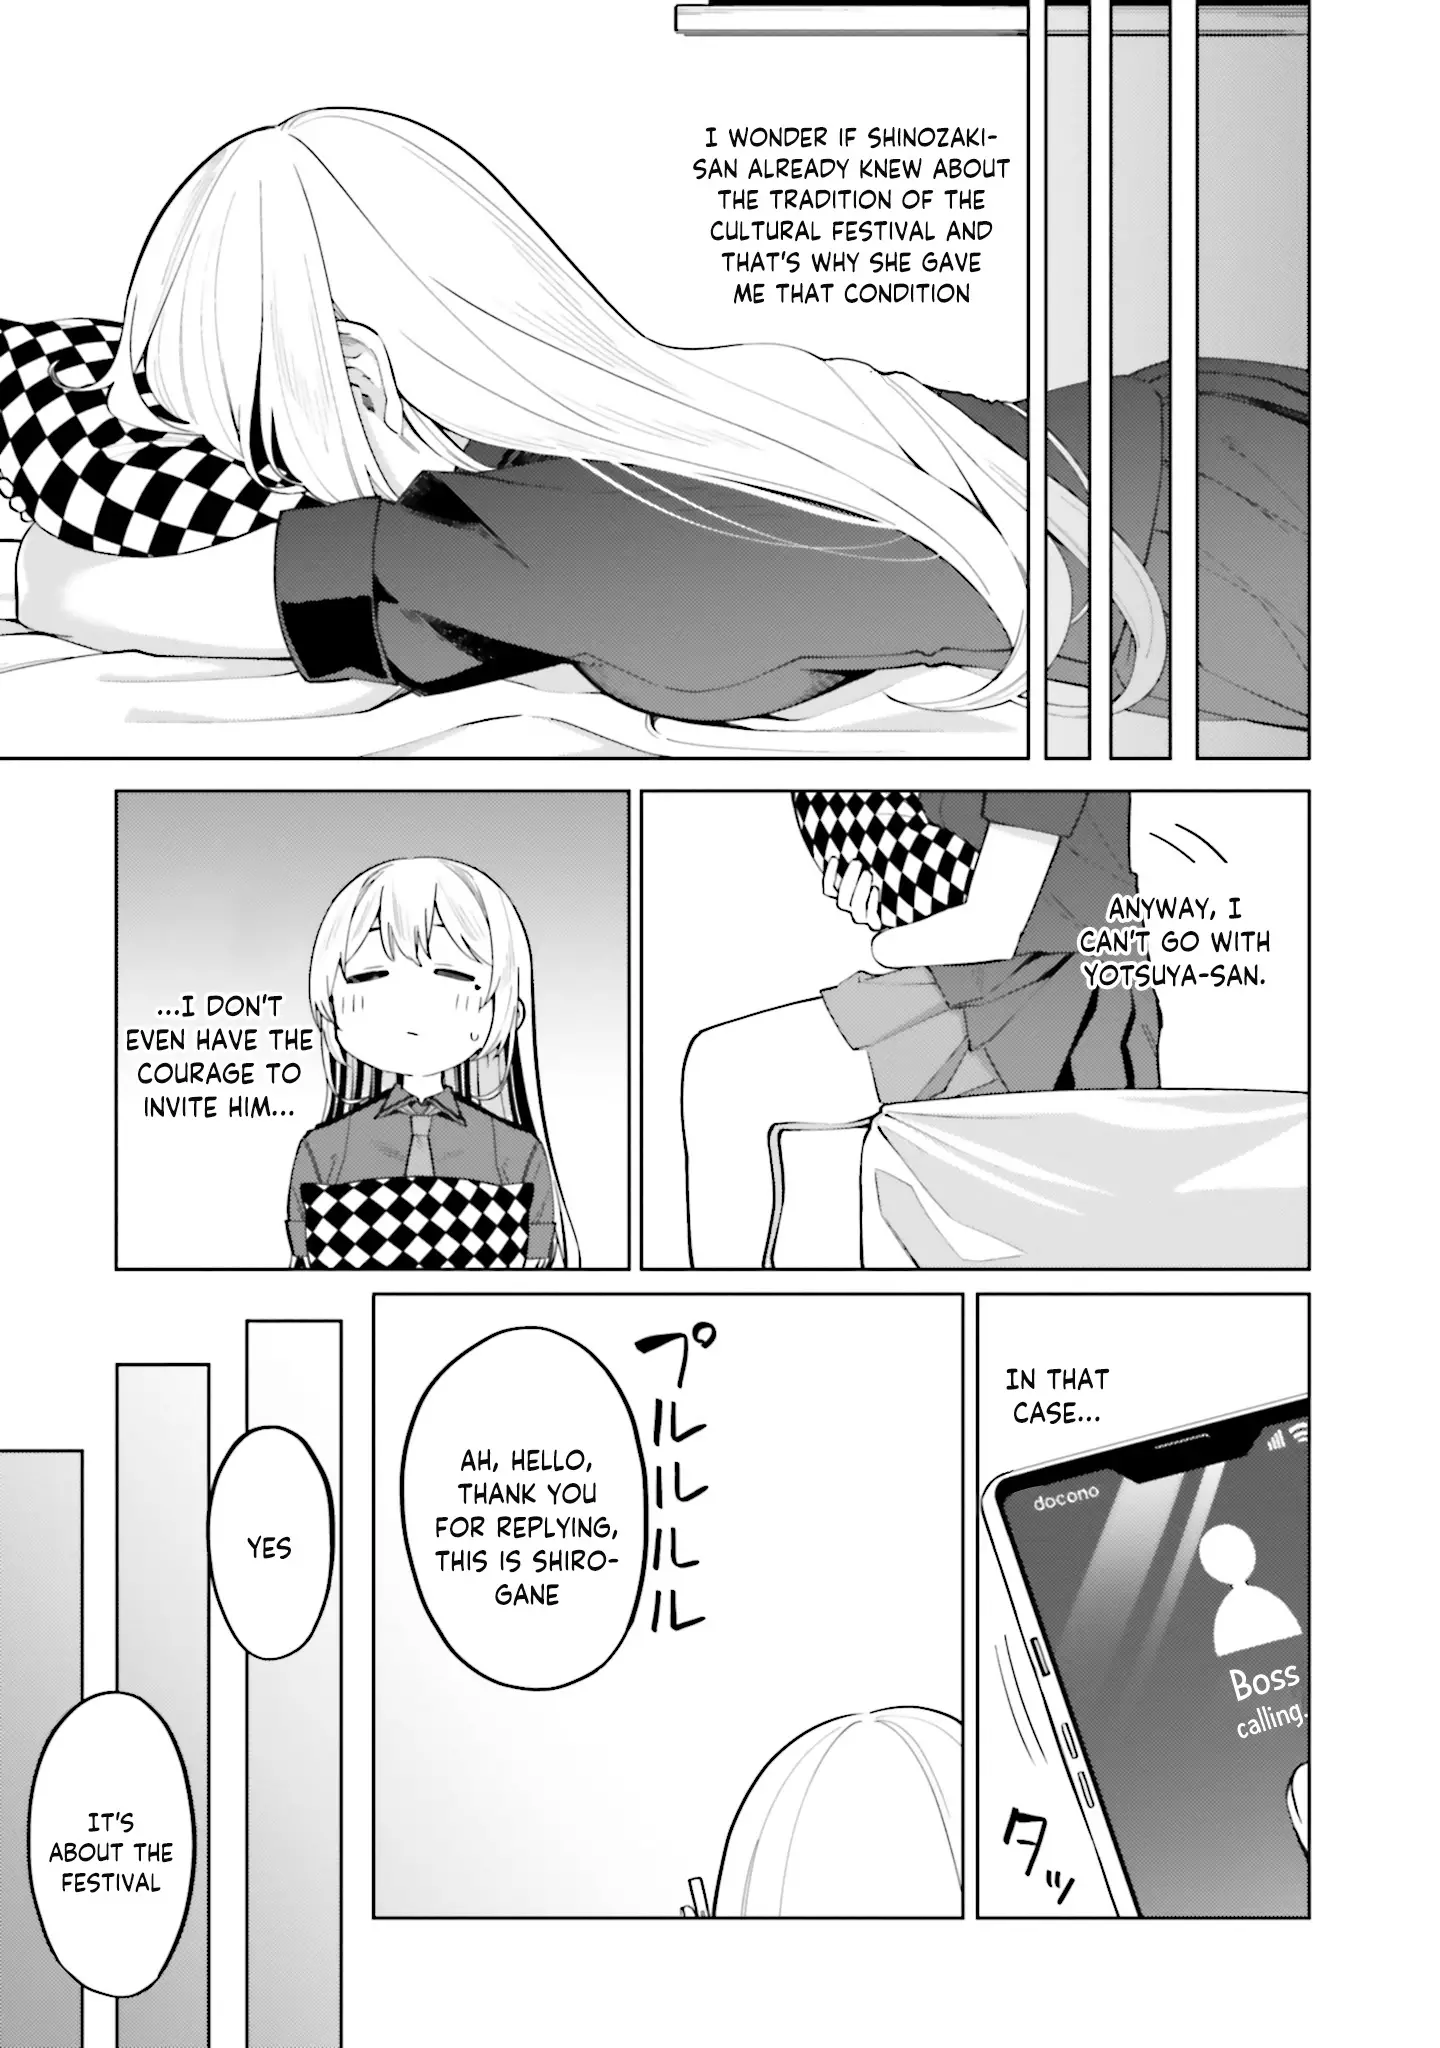 I Don't Understand Shirogane-San's Facial Expression At All - 13 page 18-752c26af